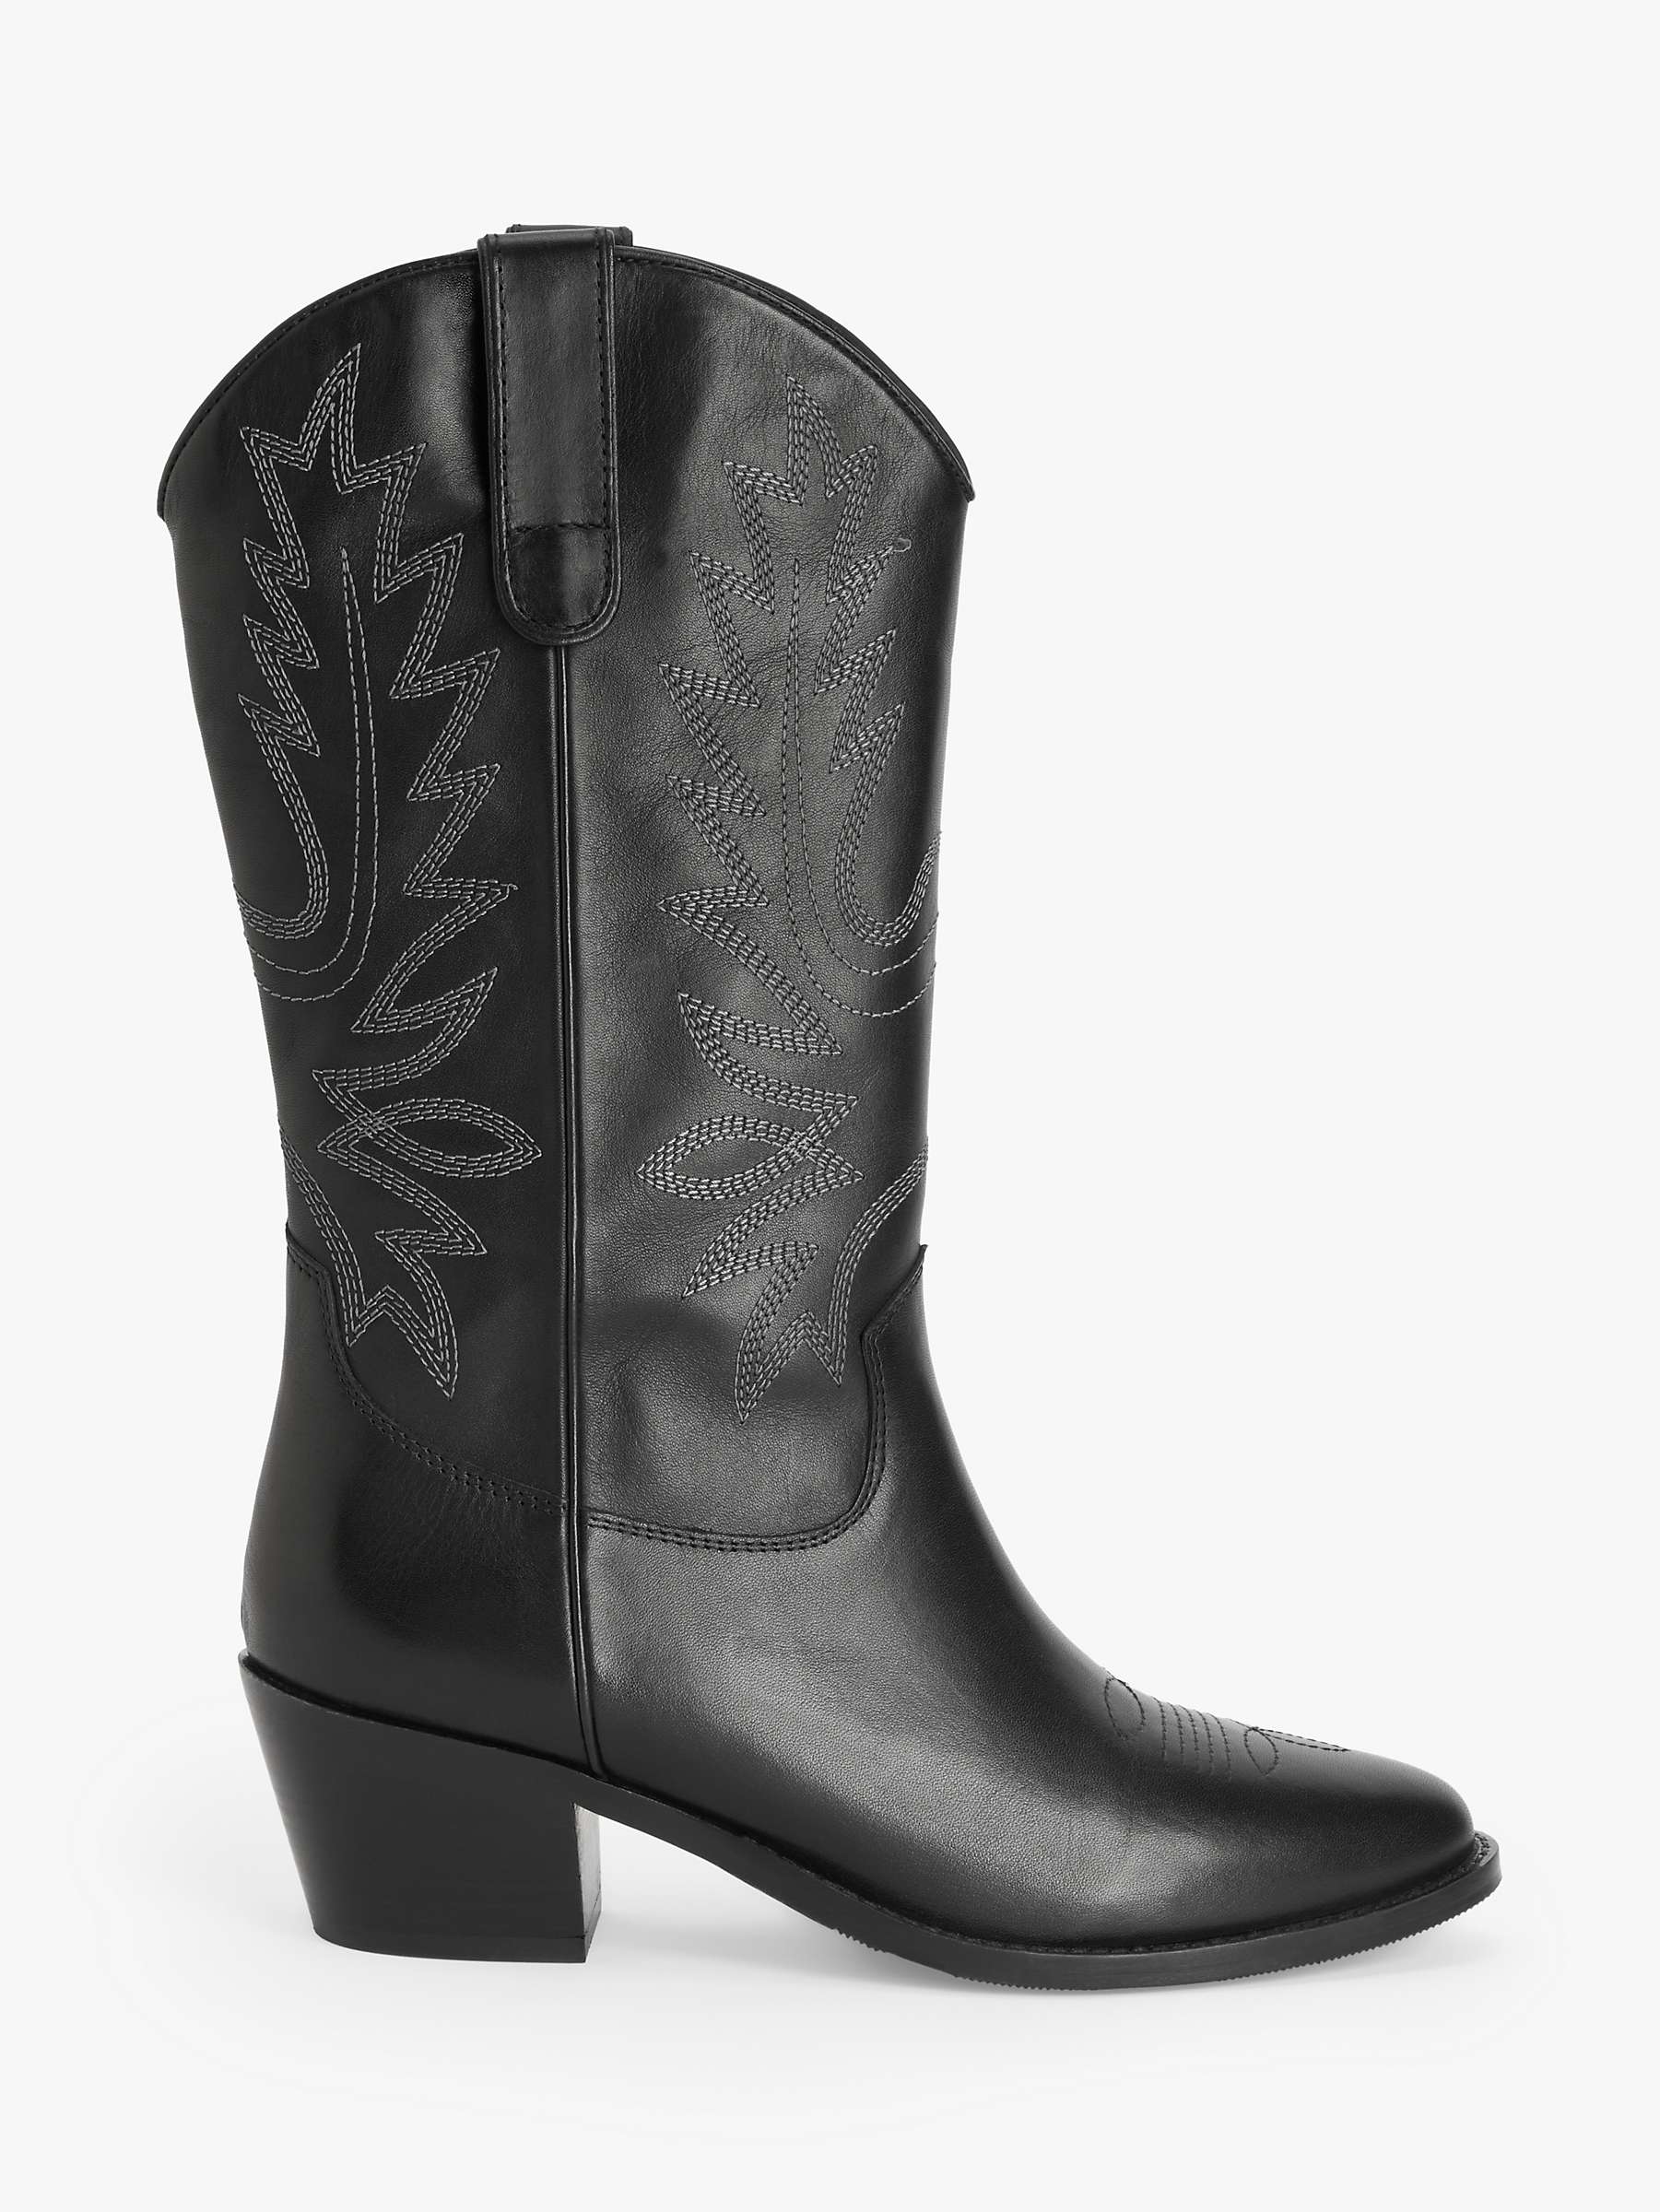 Buy AND/OR Thorn Leather Embroidered Long Western Boots, Black Online at johnlewis.com